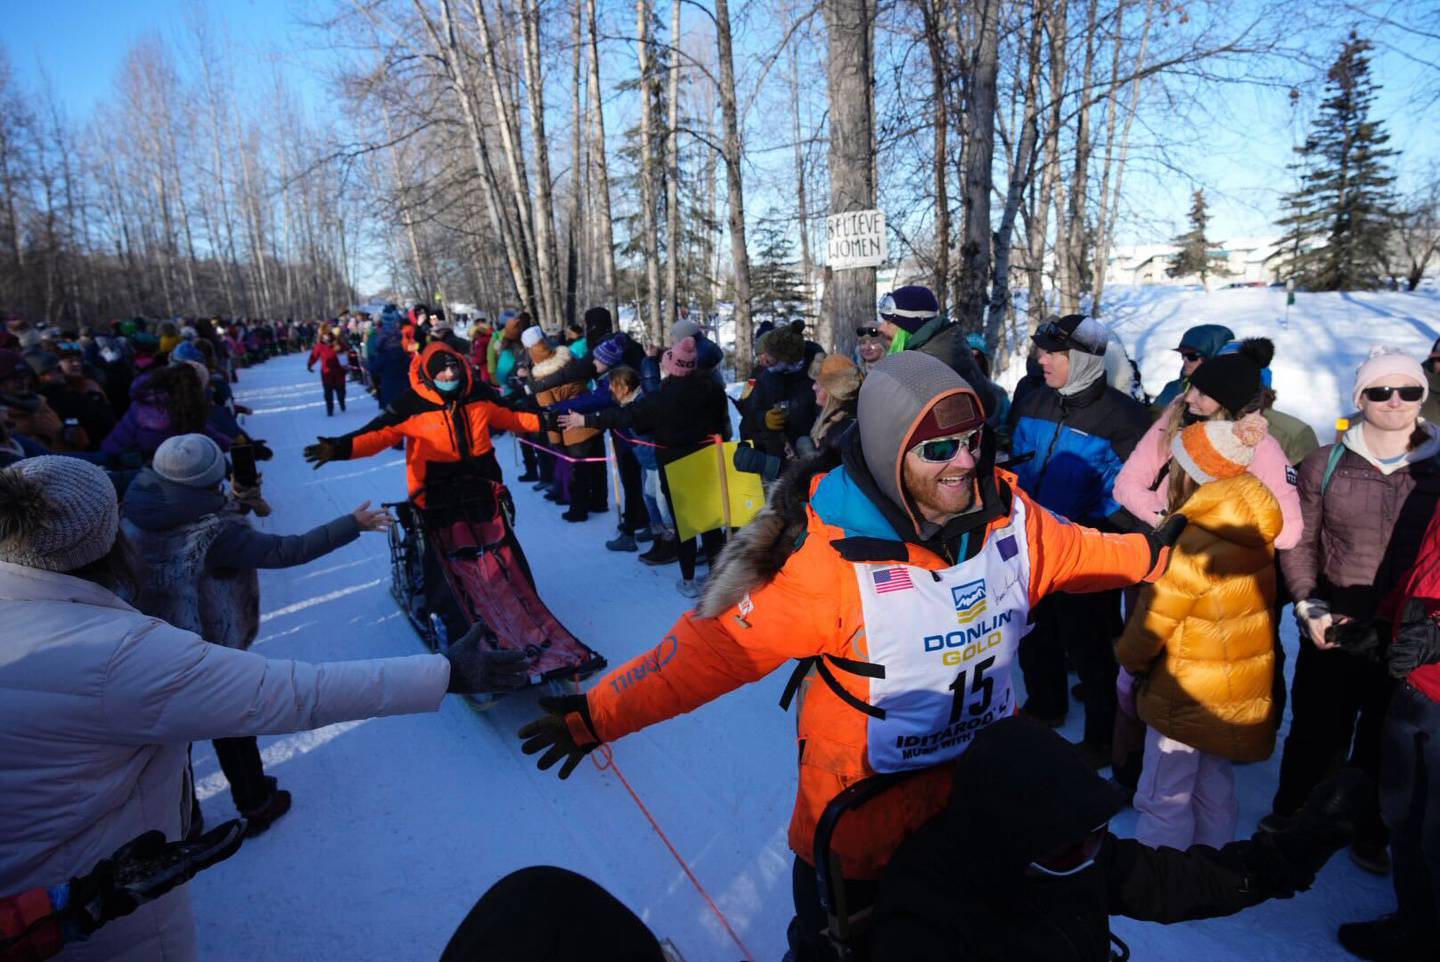 Iditarod weekend begins with mushers touring Anchorage in ceremonial